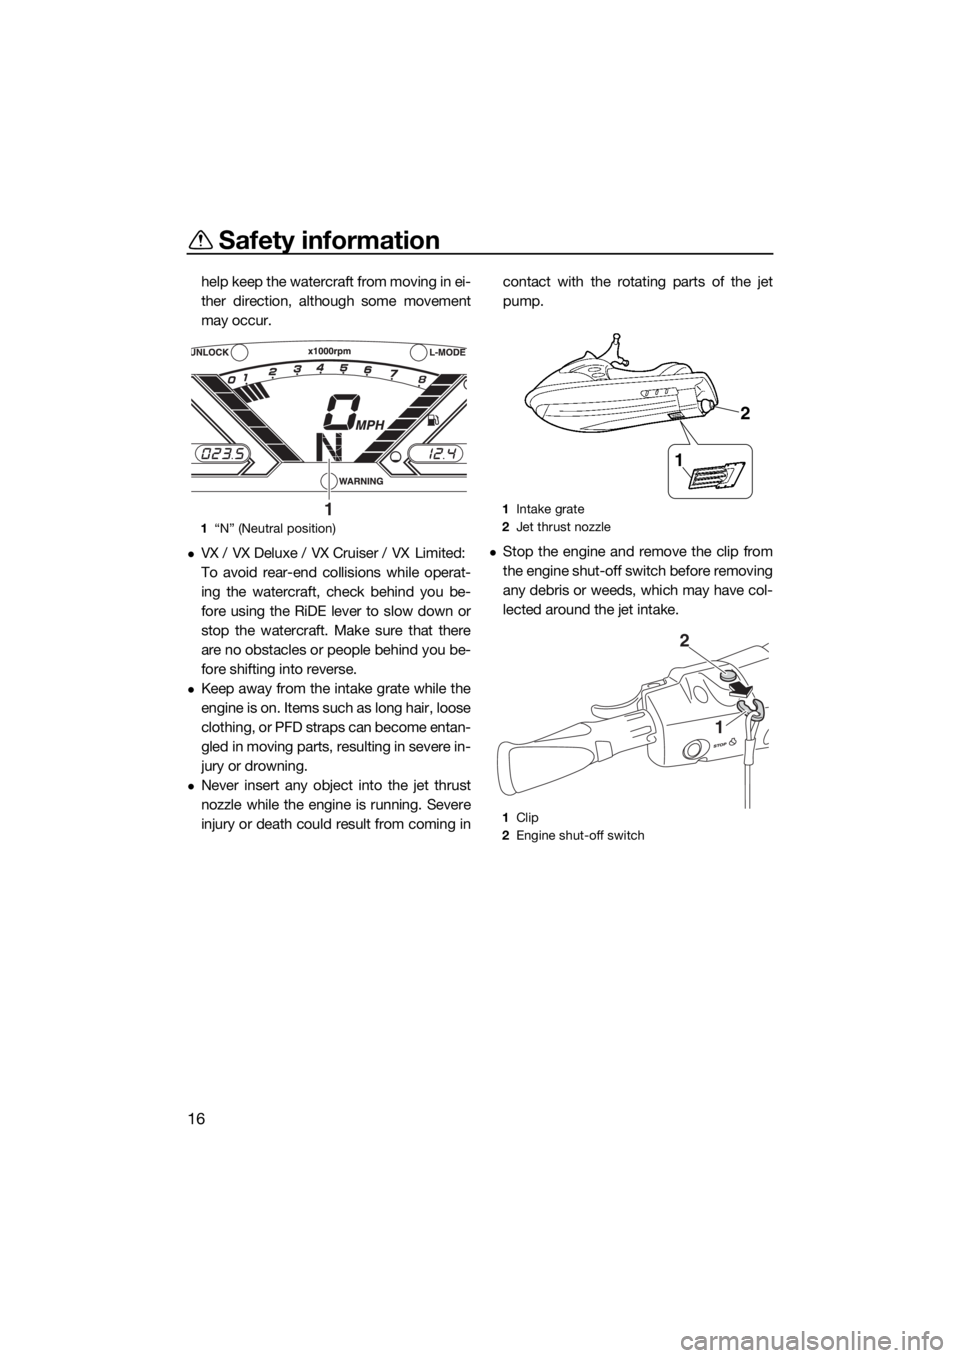 YAMAHA VX-C 2019  Owners Manual Safety information
16
help keep the watercraft from moving in ei-
ther direction, although some movement
may occur.
VX / VX Deluxe / VX Cruiser / VX Limited: 
To avoid rear-end collisions while ope